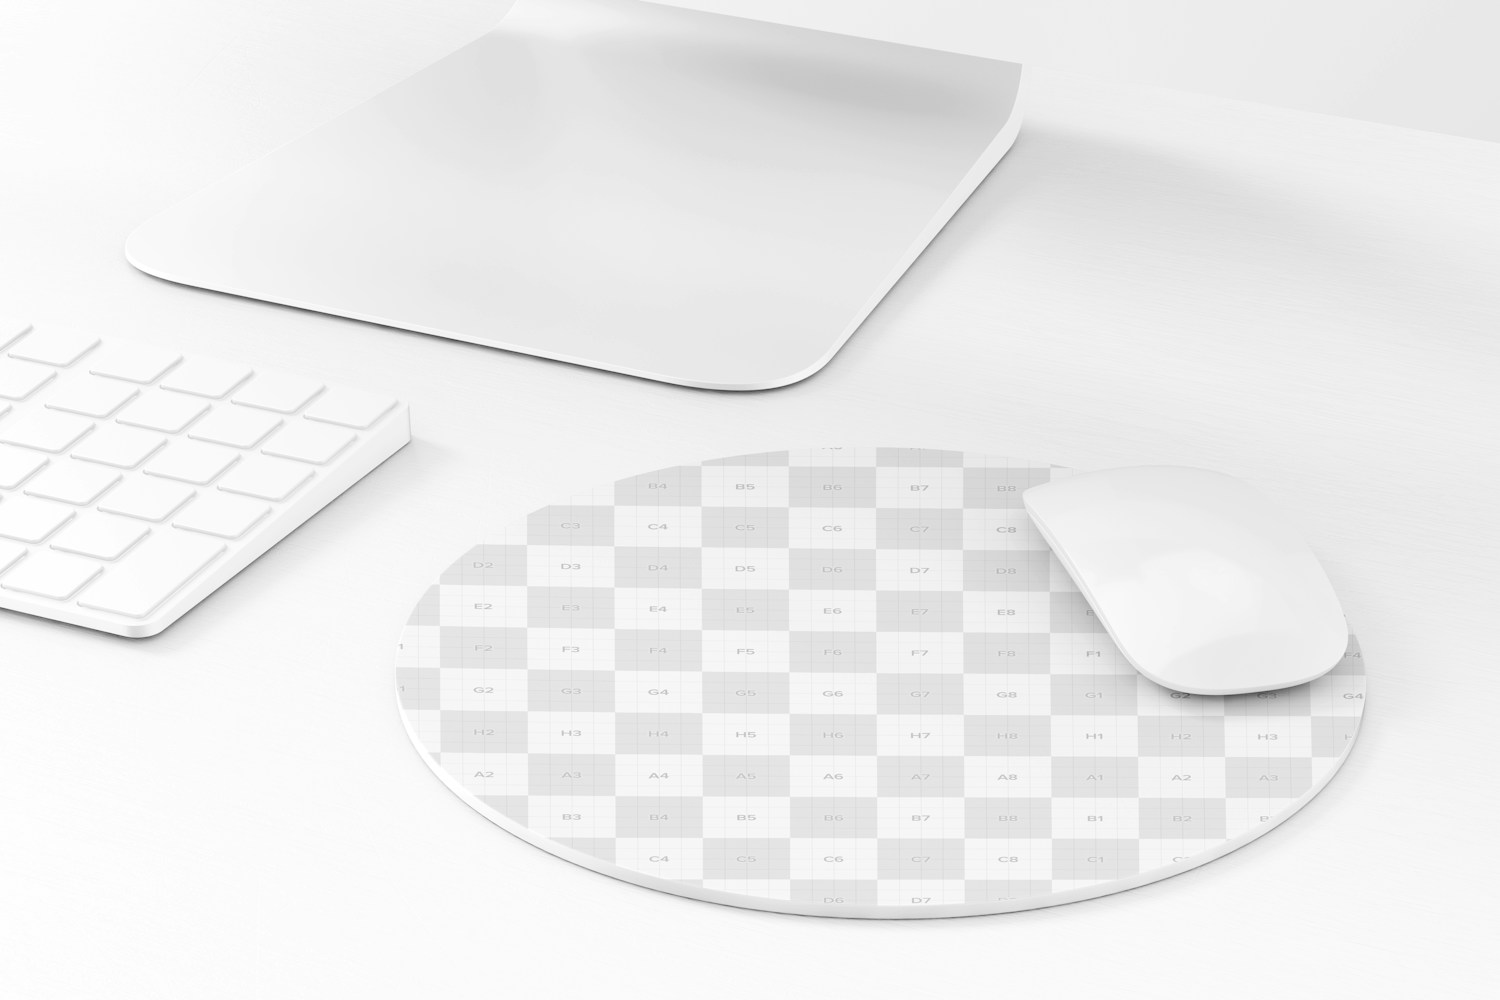 Round Silicone Mouse Pad Mockup, Perspective